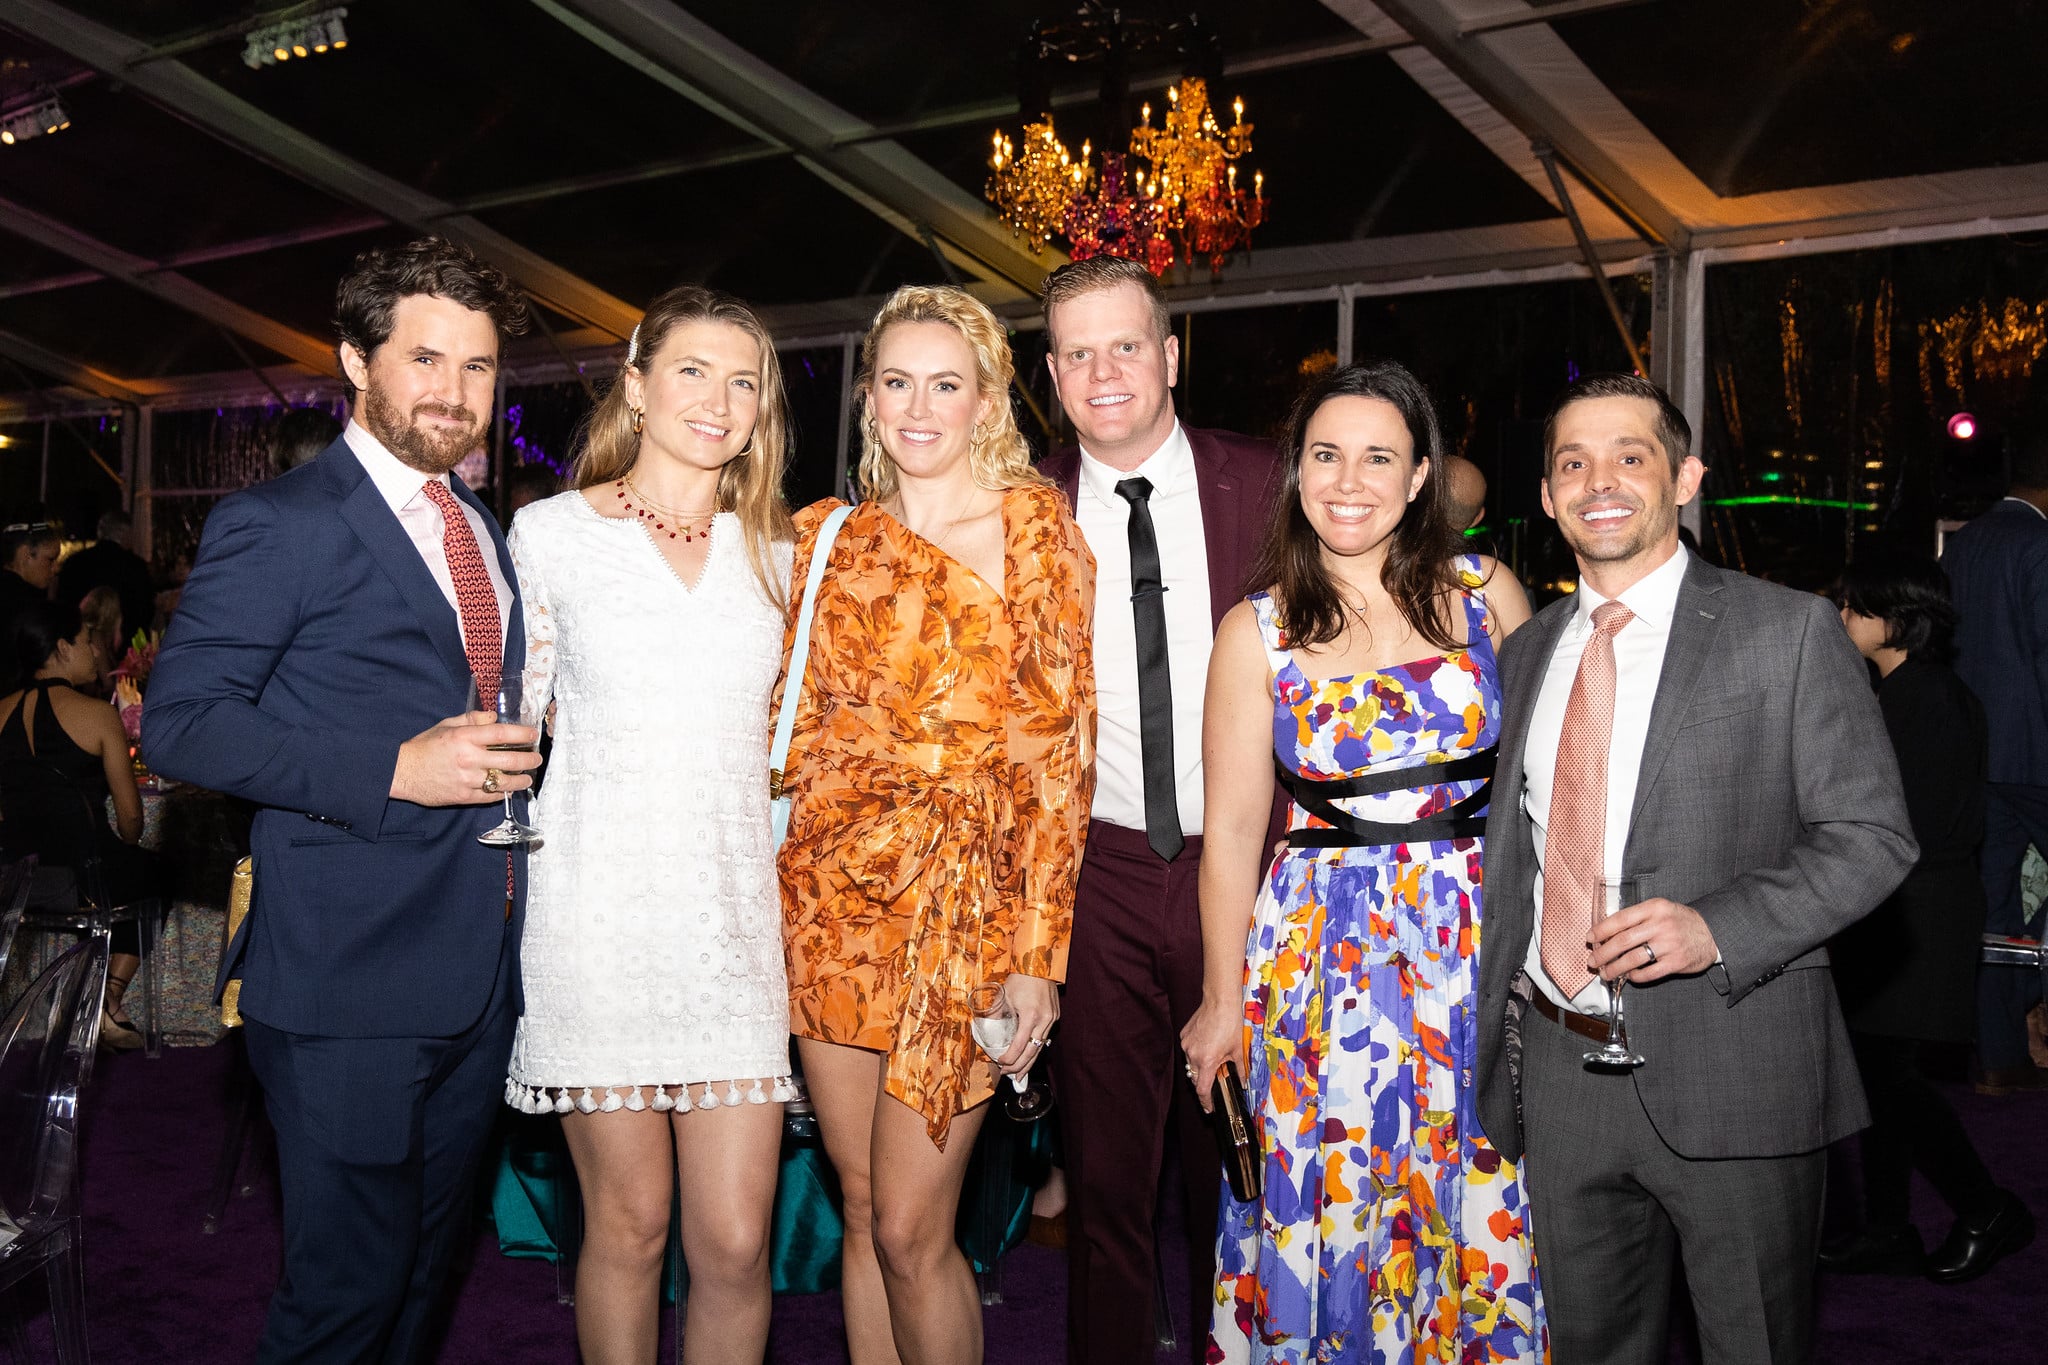 From L-R: Monte Mabry, Lucy Mabry, Kathleen Cizek, Kyle Cizek, Emily Glassel, Sean Glassel Gala on the Green® at Discovery Green in downtown Houston. February 23, 2023. Photo: Lawrence Elizabeth Knox